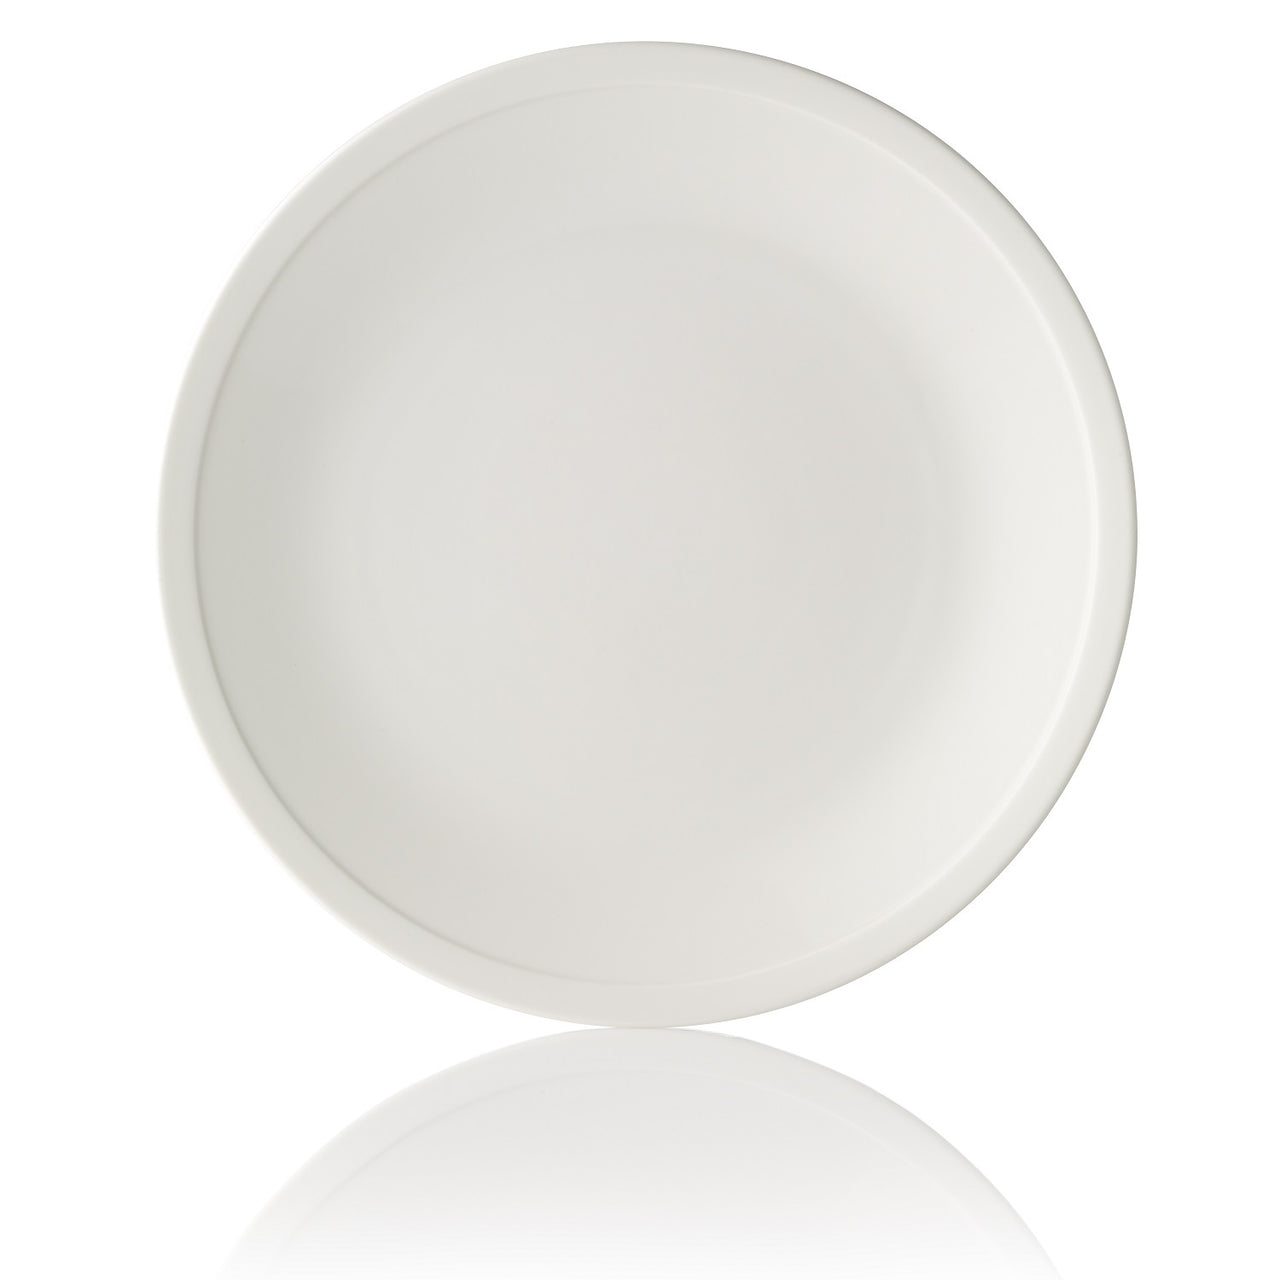 Everyday by Adam Liaw 25cm Dinner Plates (Set of 4)